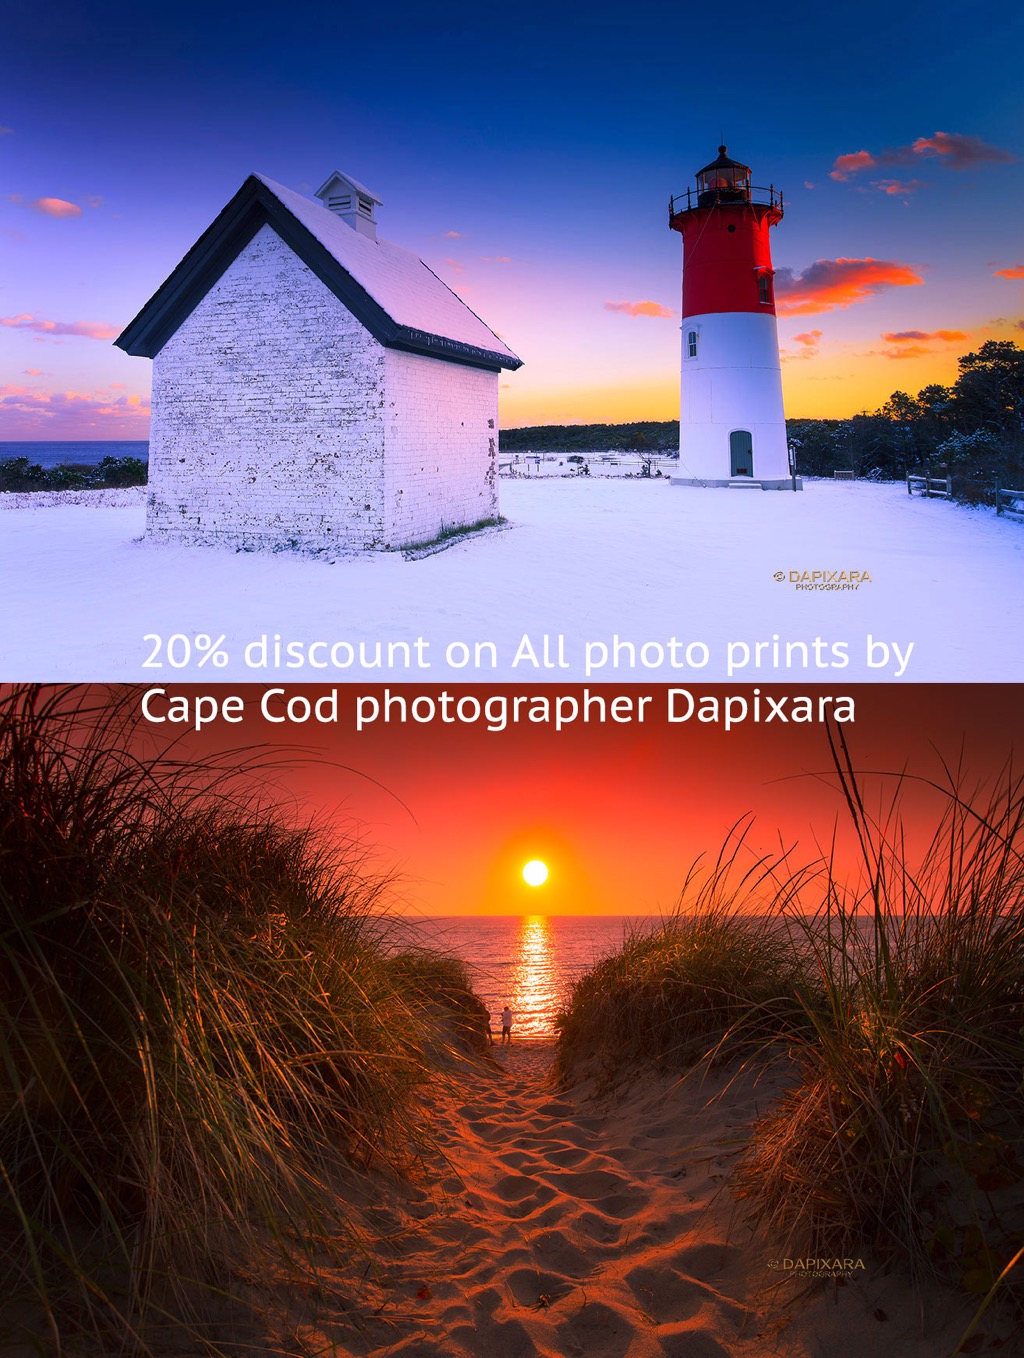 20% DISCOUNT Code on all photo art prints by Cape Cod photographer Dapixara!! Discount is available starting 03/15/2019 and expires at 03/30/2019. Code: FCXZHA  . More info at https://dapixara.com